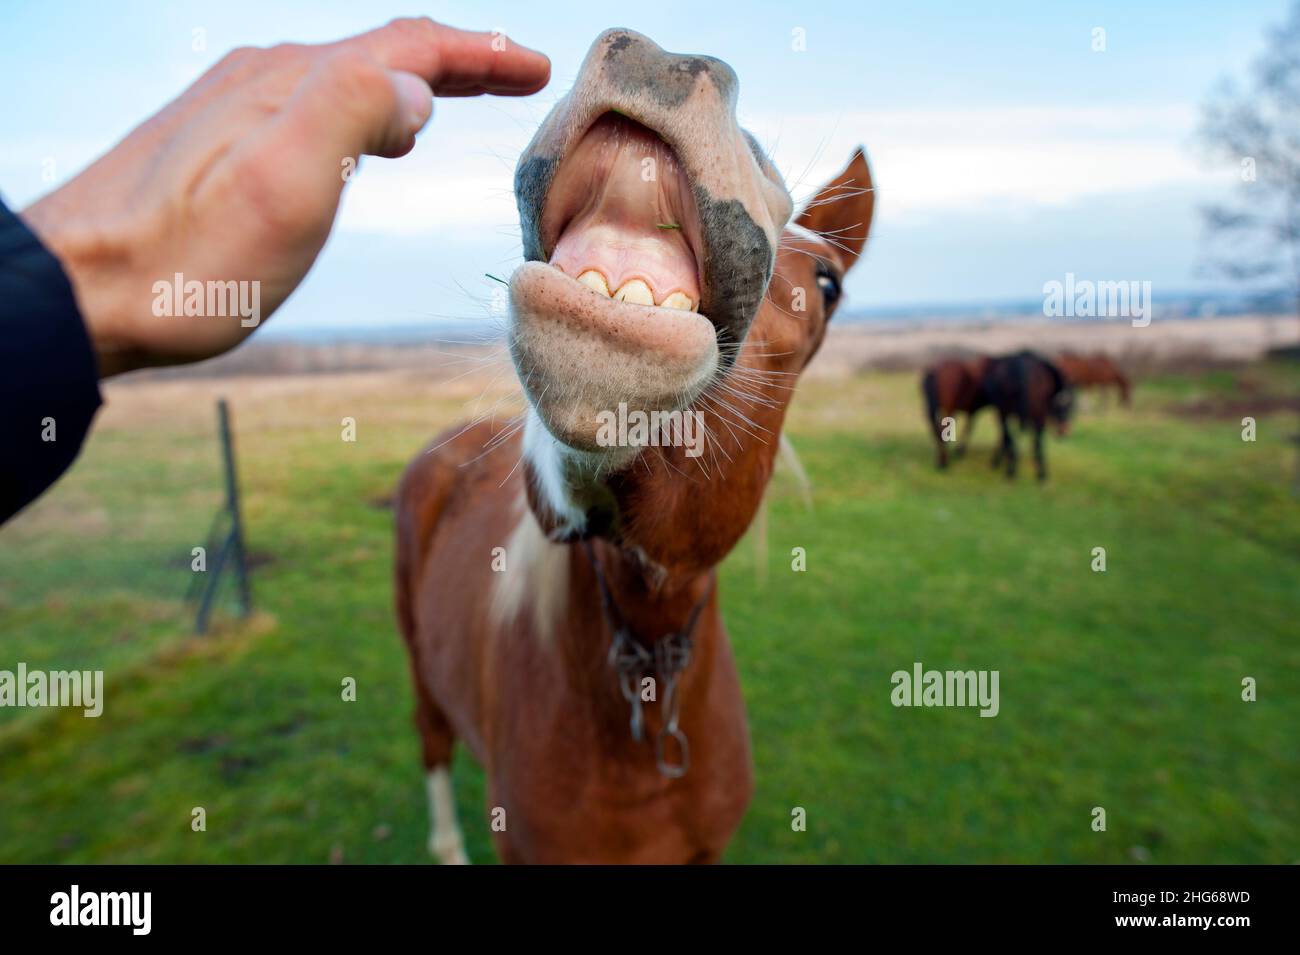 Brown horse laughing and smiling outdoors Stock Photo